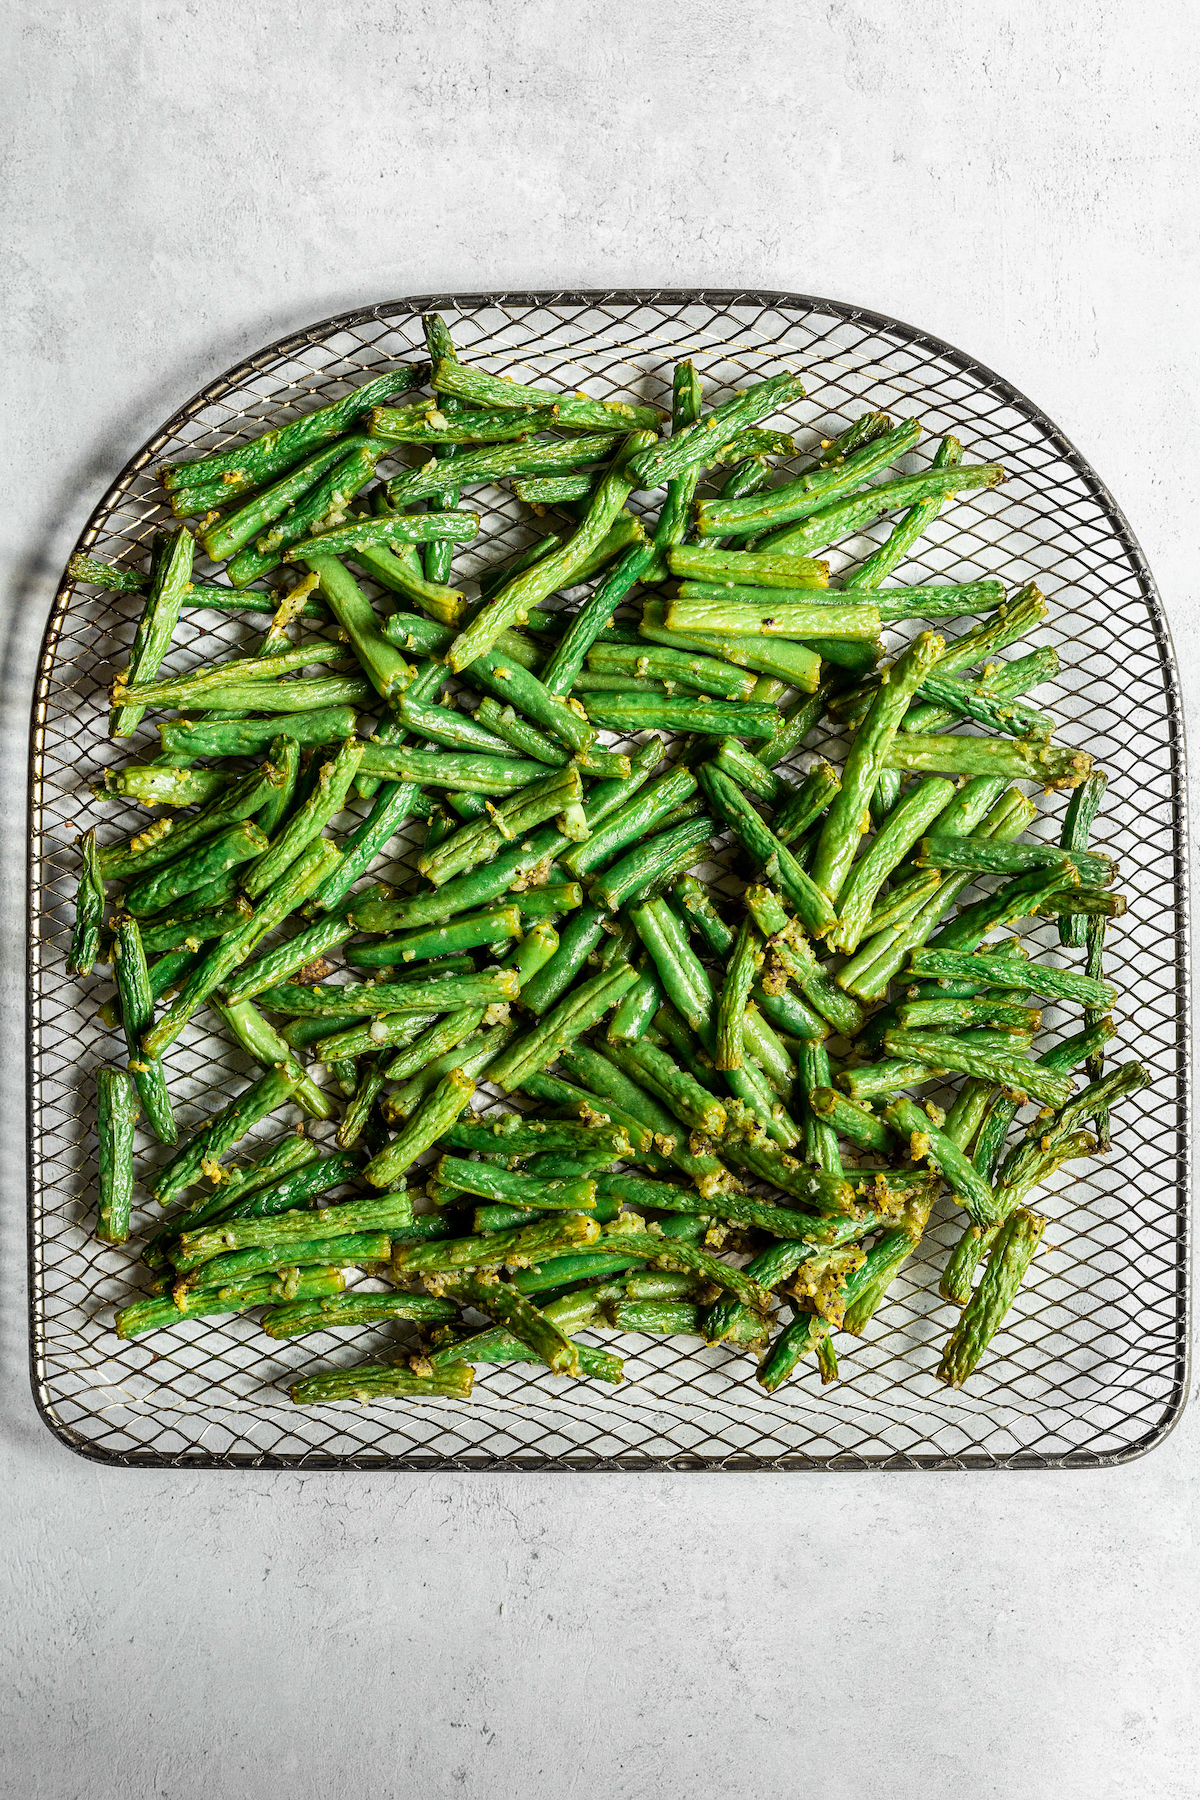 Air-fried green beans on the tray of an air fryer.